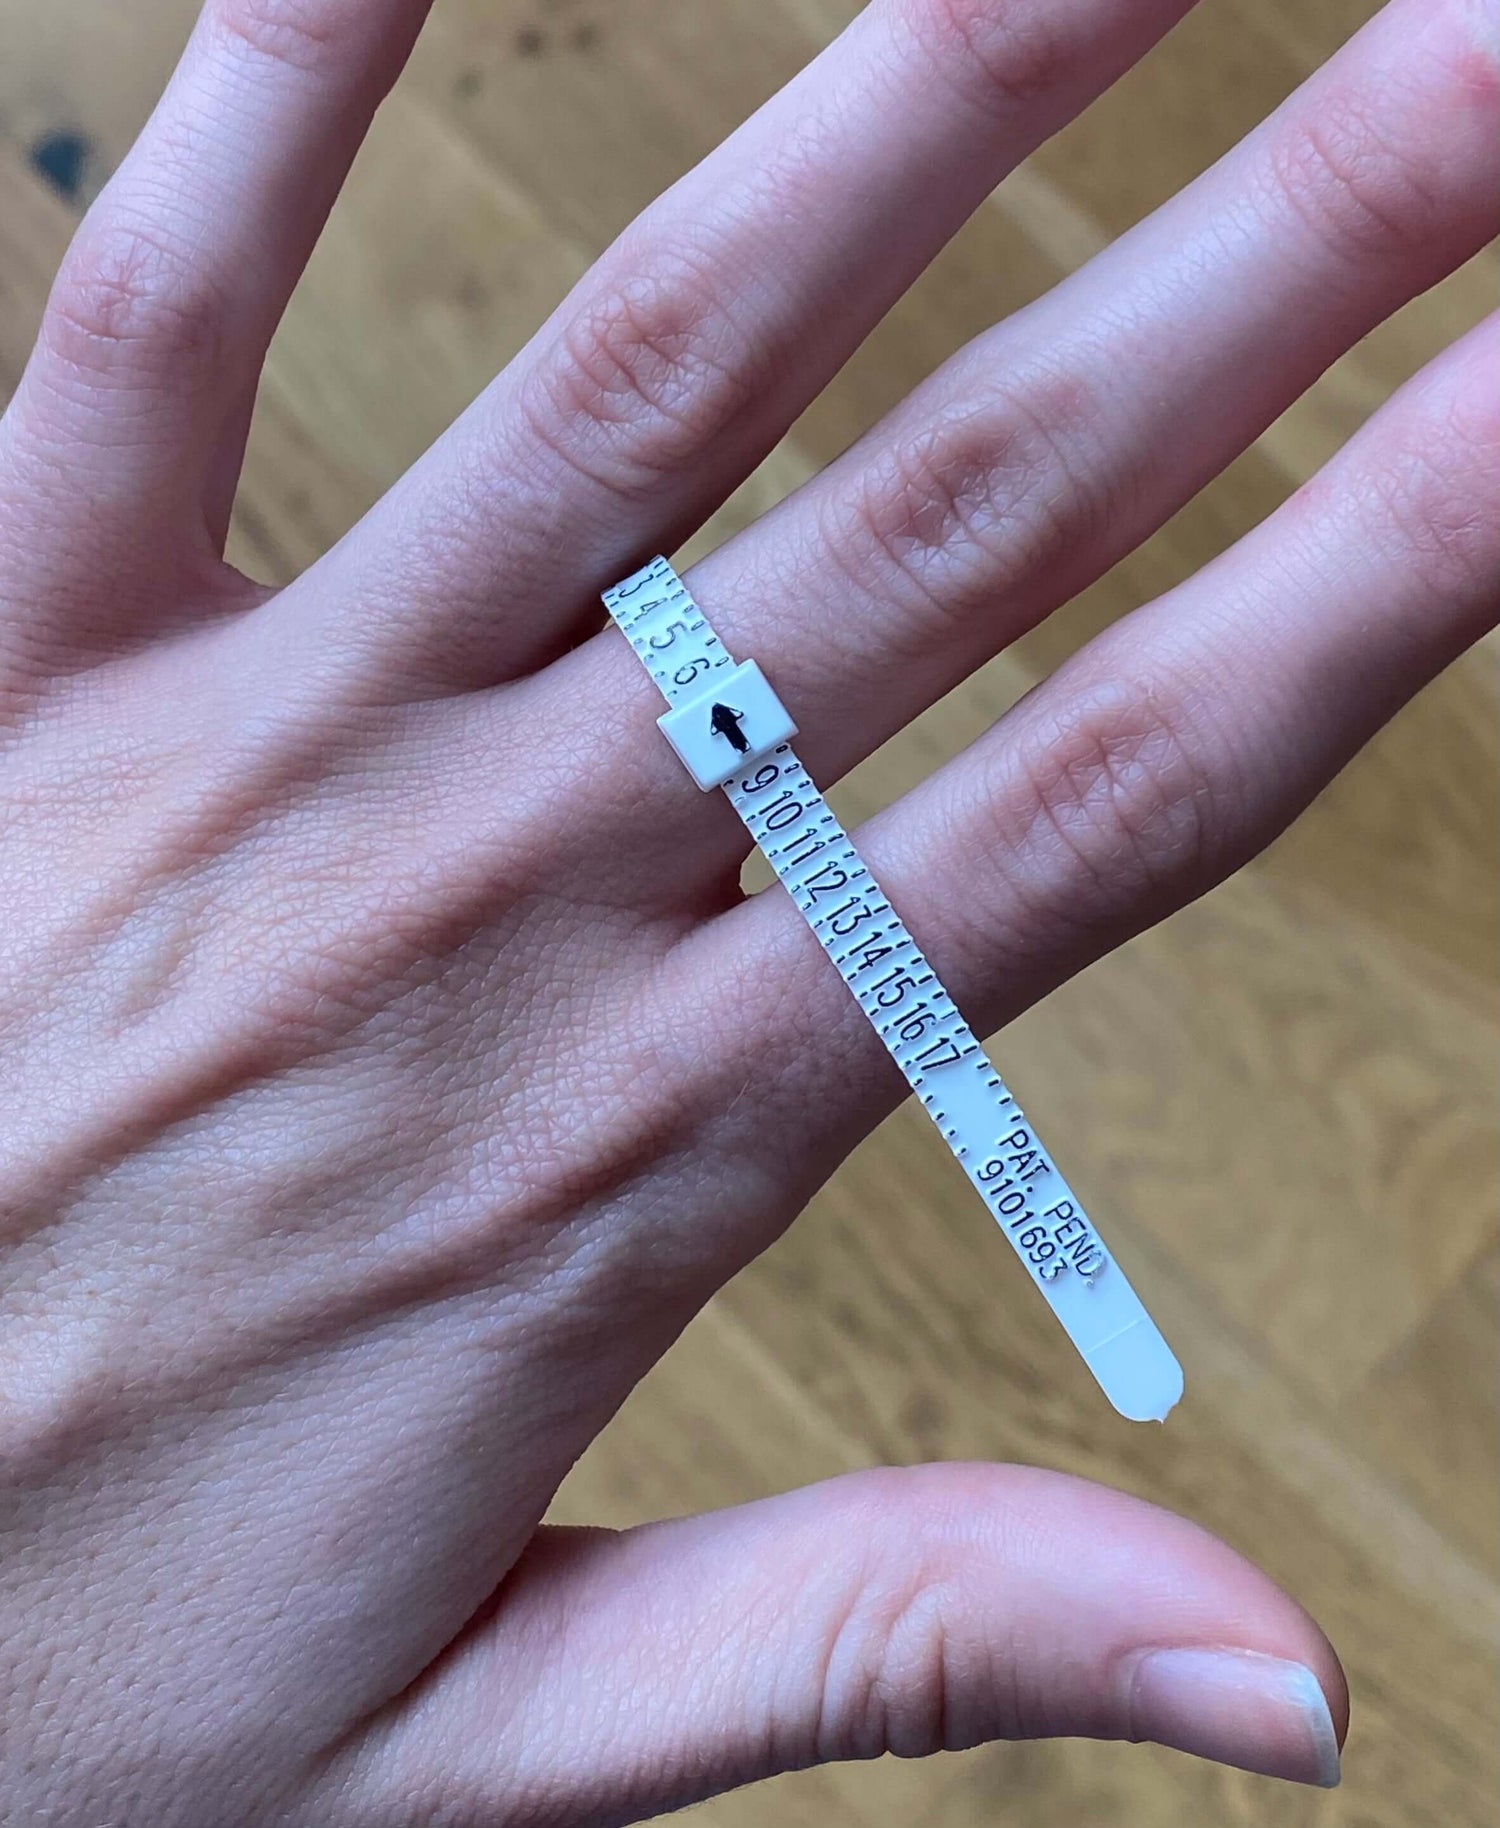 How to Measure Your Ring Size at Home: Get an at home sizer